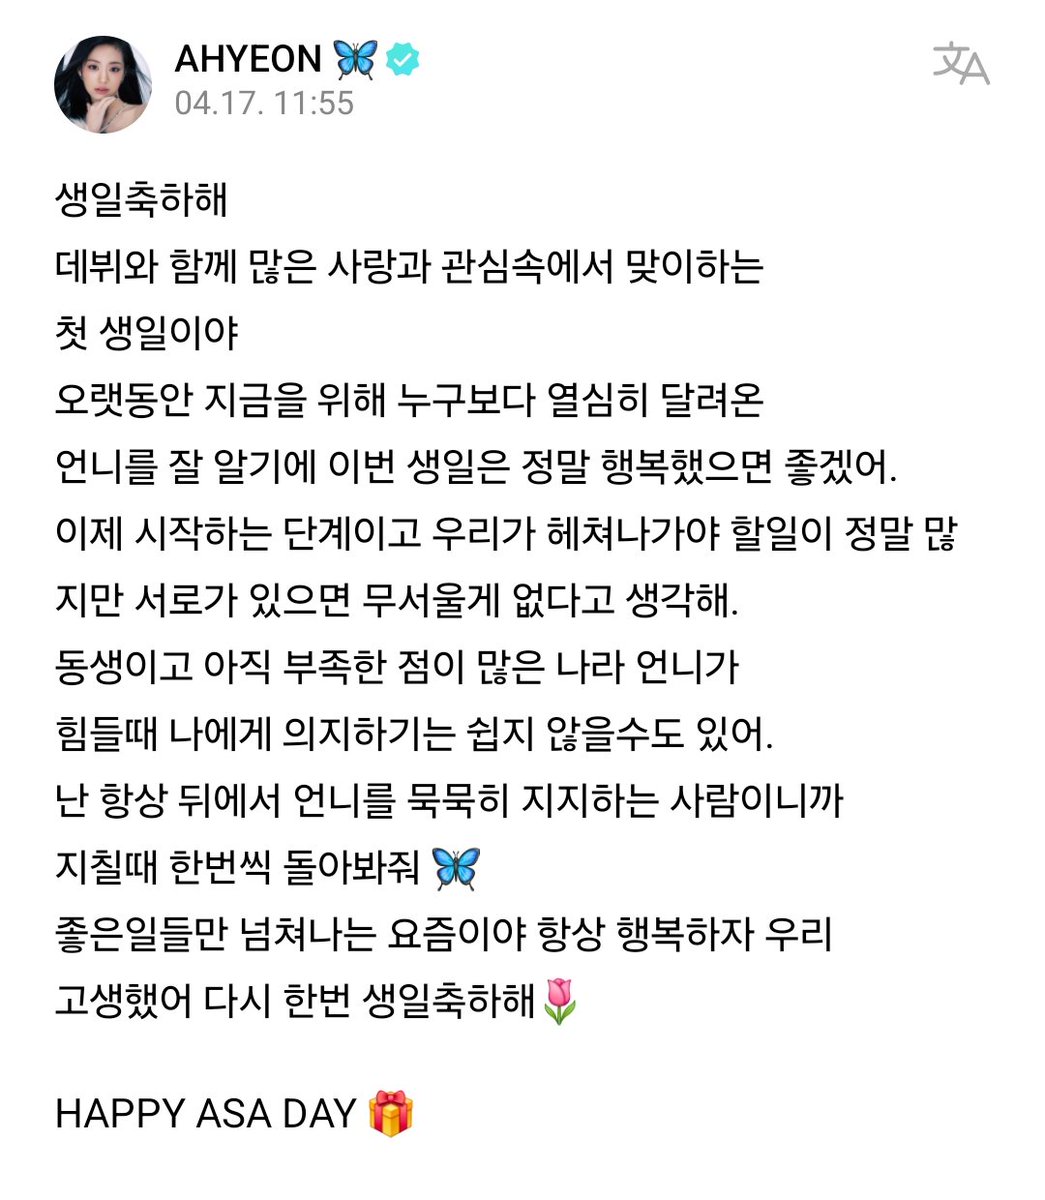 [WEVERSE] 240417
#AHYEON update 

“Happy birthday! It's your first birthday celebrated with lots of love and attention since your debut. I hope this birthday brings you immense happiness. We're entering a new phase, and although there's much ahead of us, I believe we can overcome…